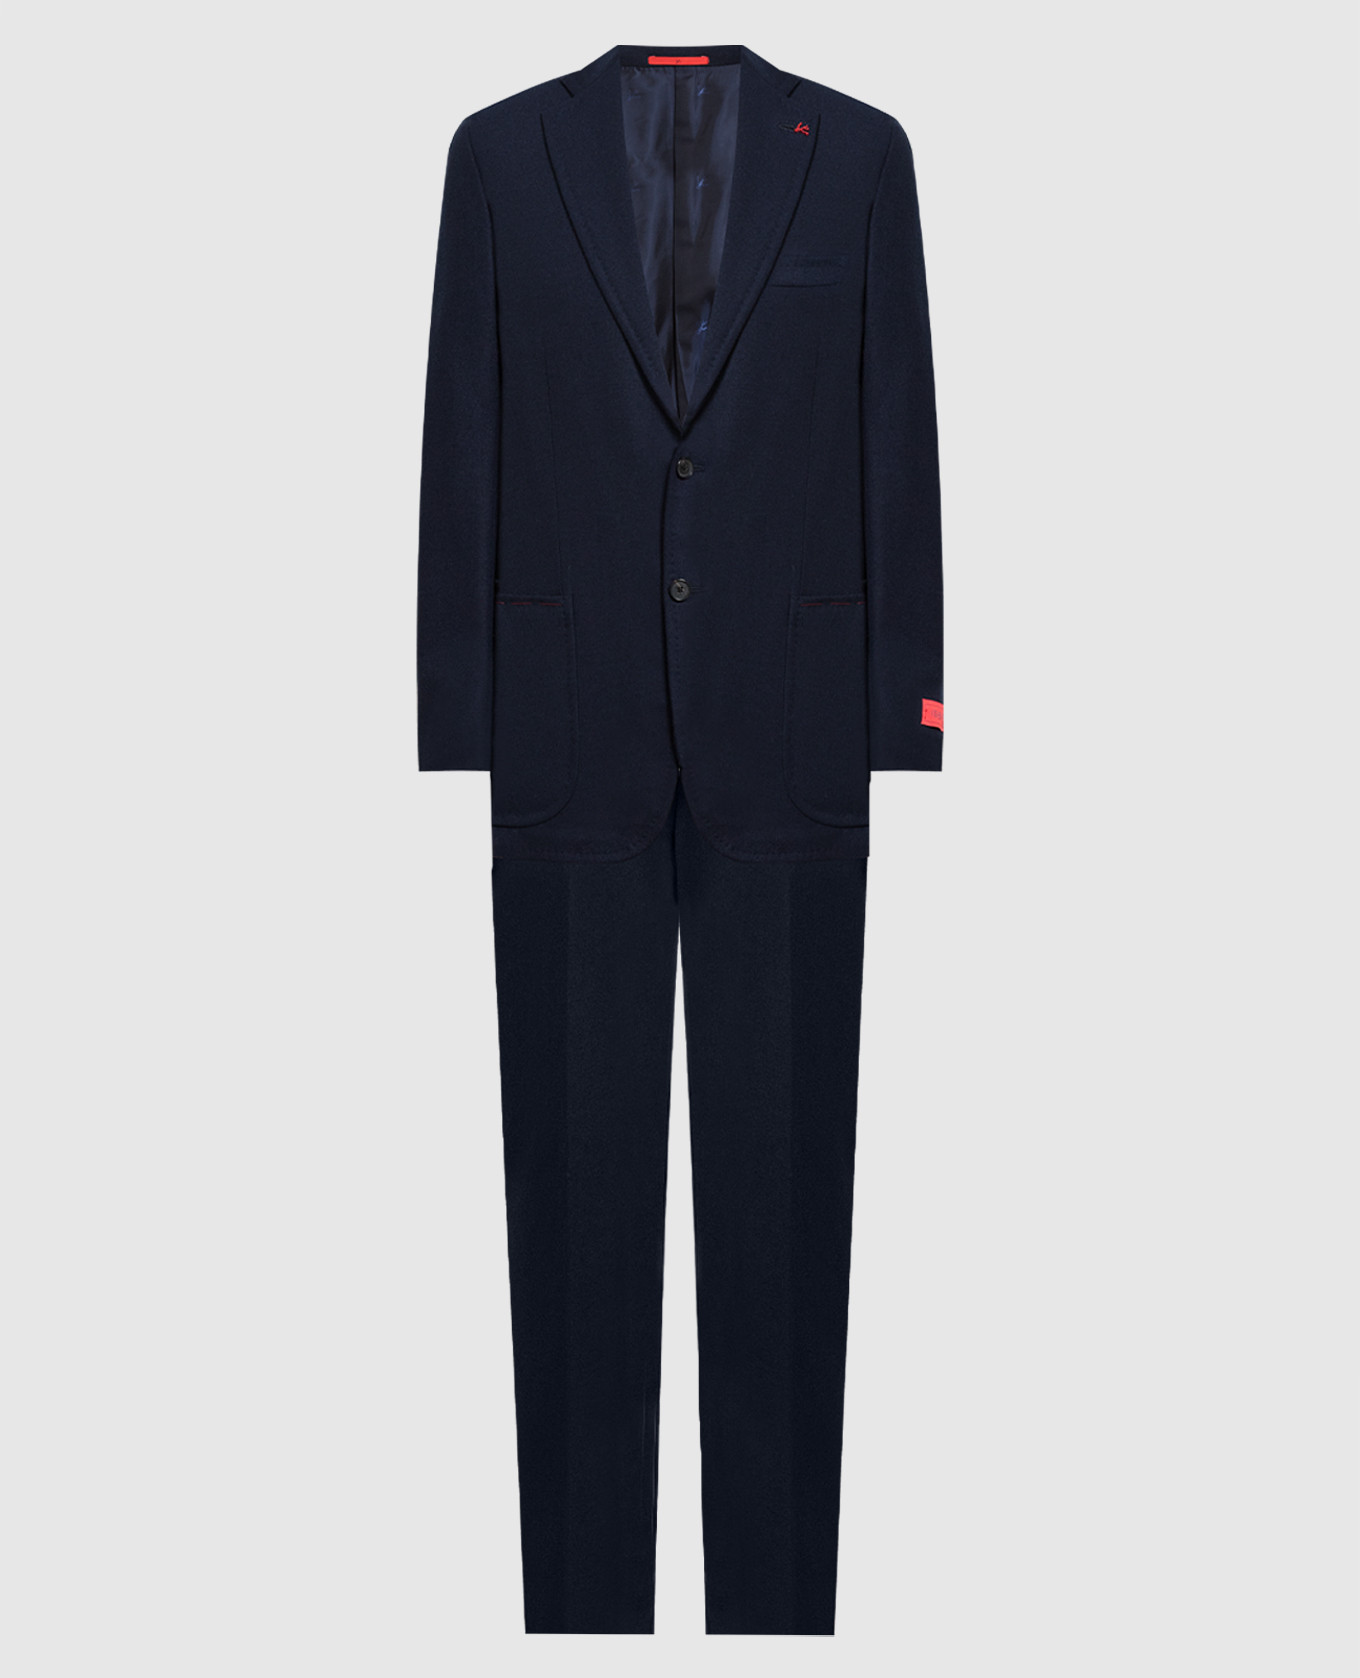 Blue wool and cashmere suit